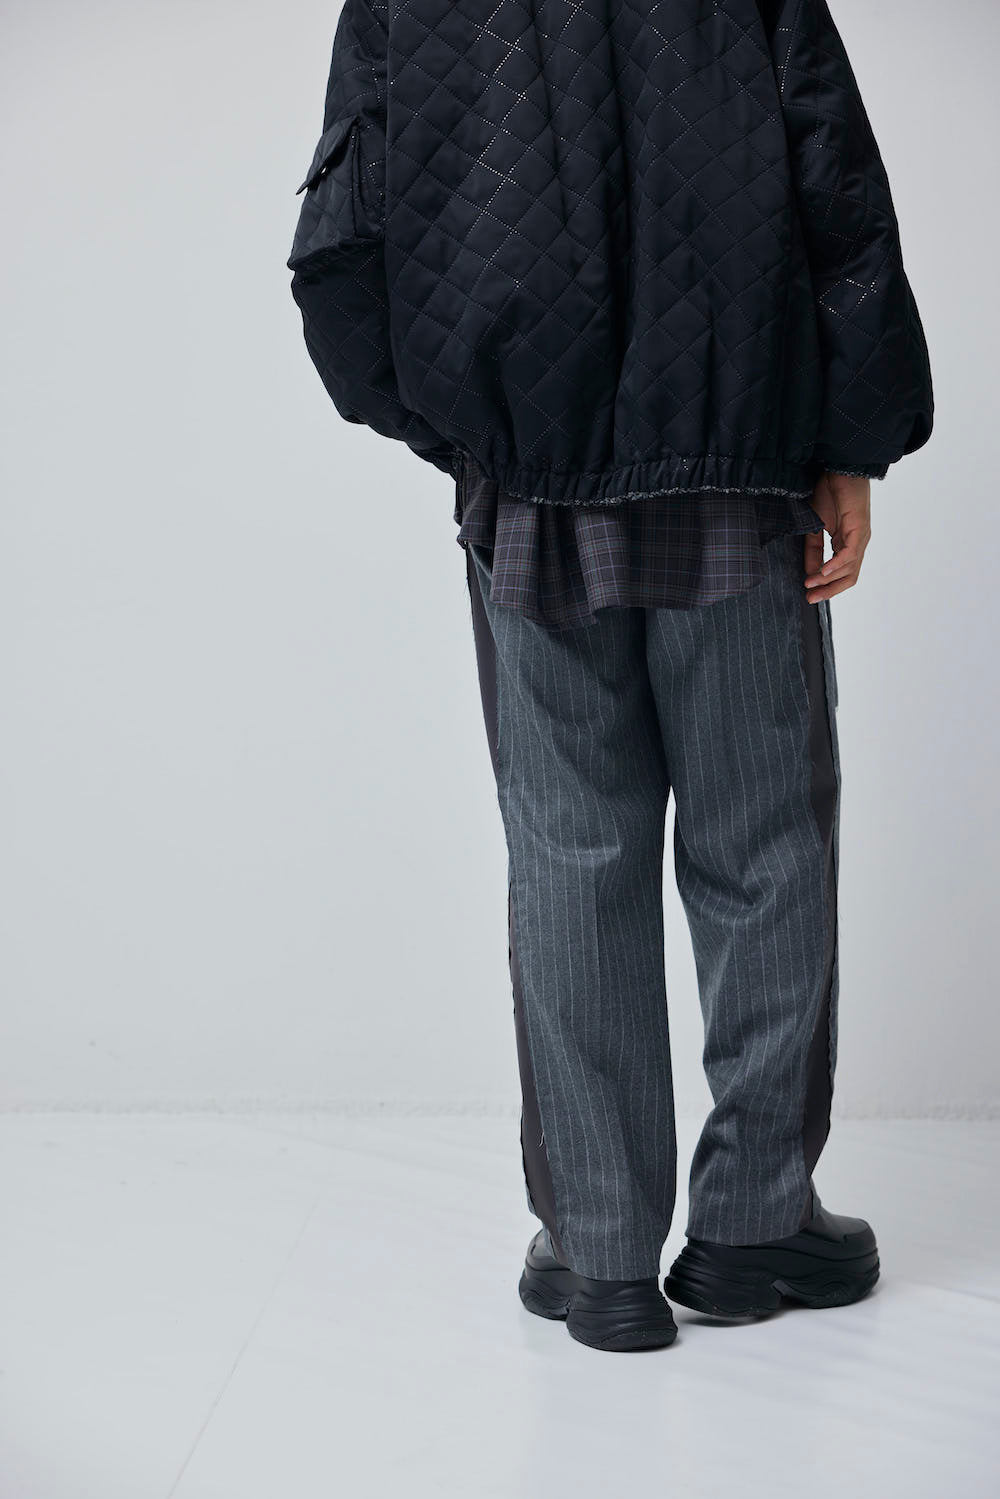 LB23AW-PT04-GST | Striped wool serge sideline wrapped trousers | GRAY STRIPE 